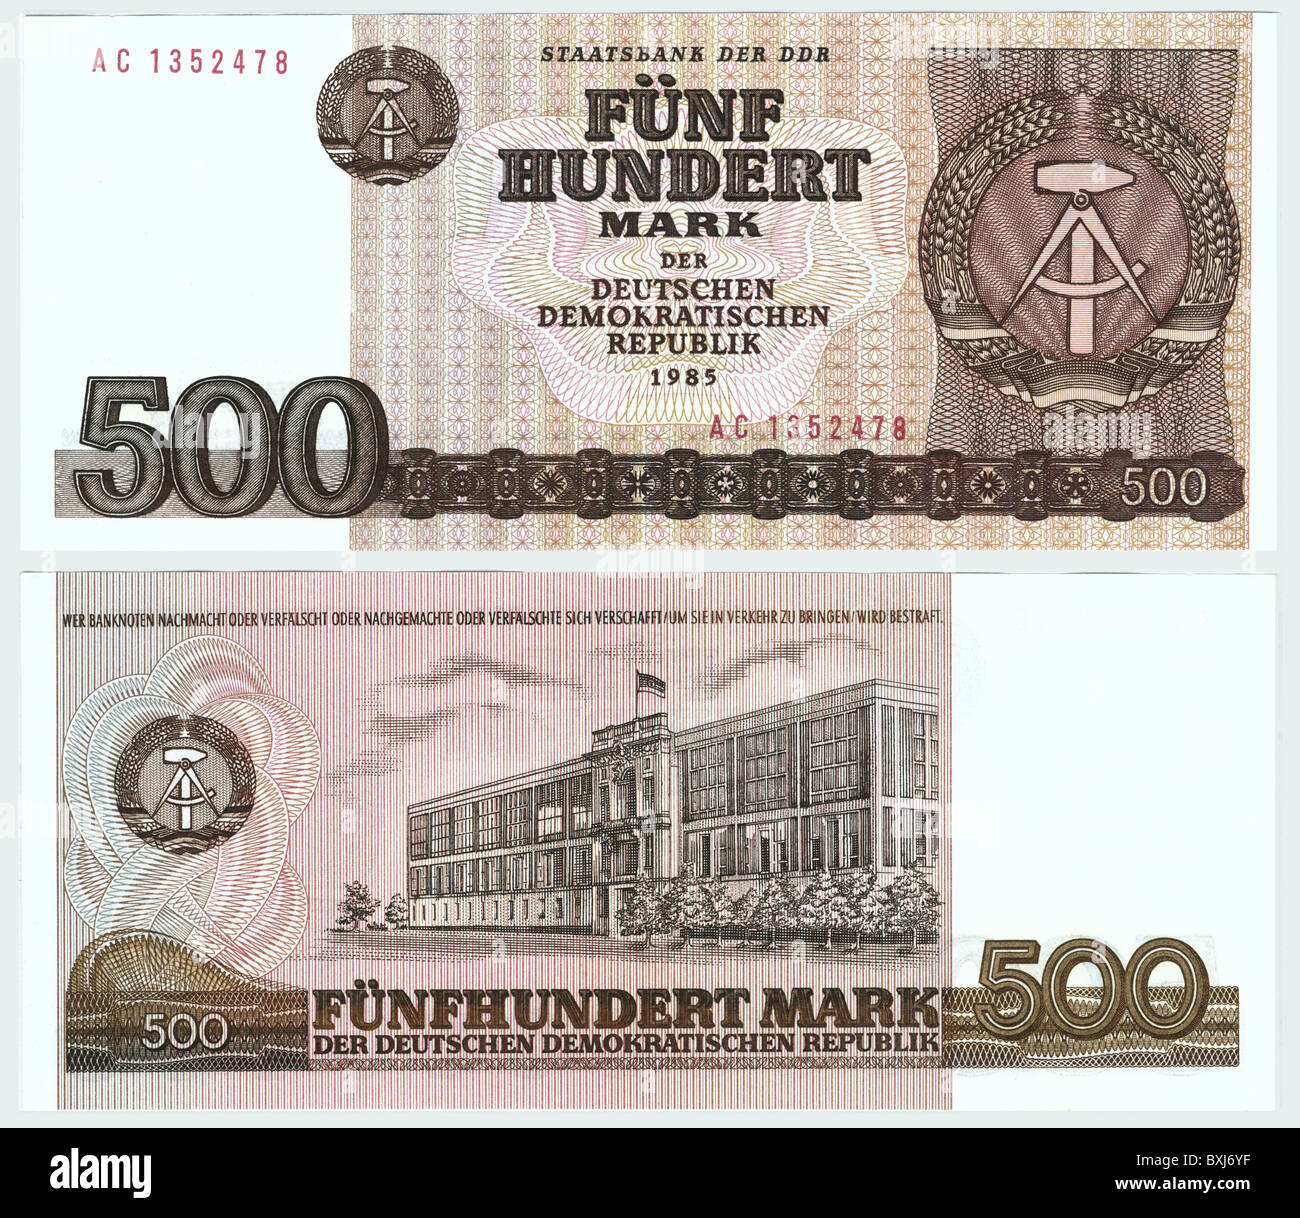 money / finance, bank notes, East Germany, 500 Mark, 1985, Additional-Rights-Clearences-Not Available Stock Photo